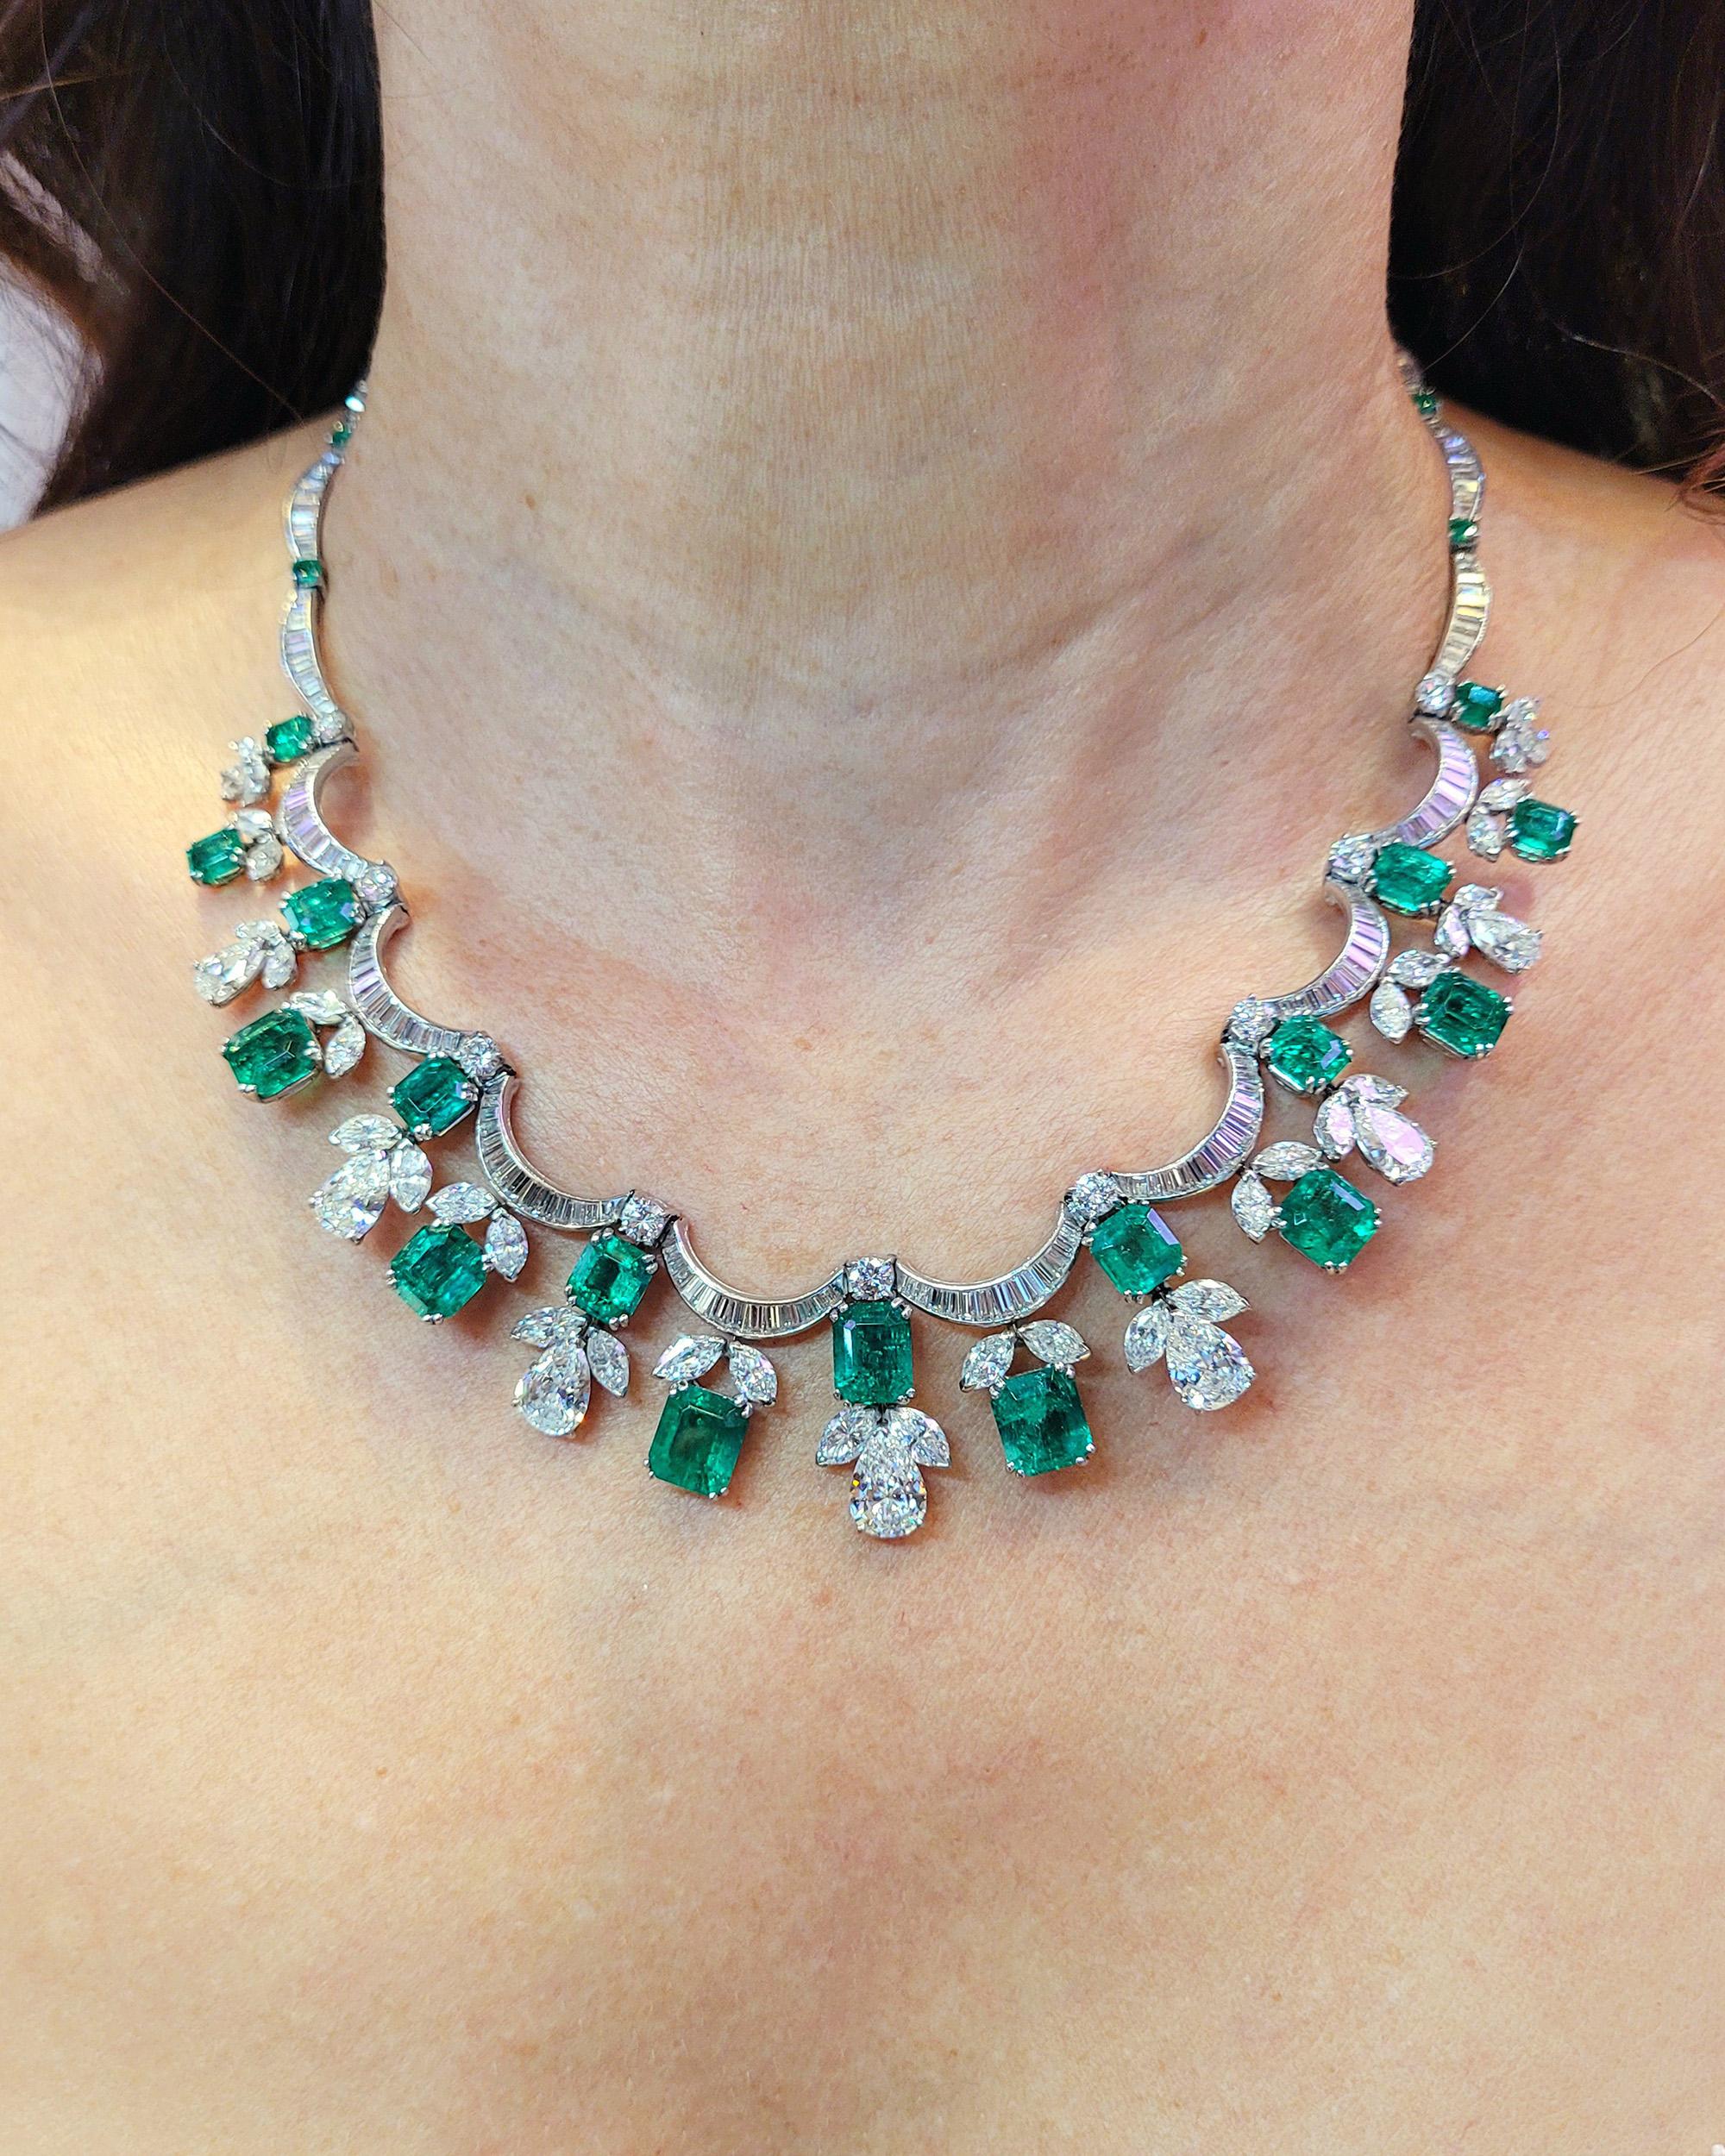 Twenty shimmering scalloped ribbons of baguette diamonds—twelve shallows and eight deeply curved—undulate around the neck interspersed with circular-cut emeralds and circular-cut diamonds and in this exquisitely designed Contemporary Diamond Emerald